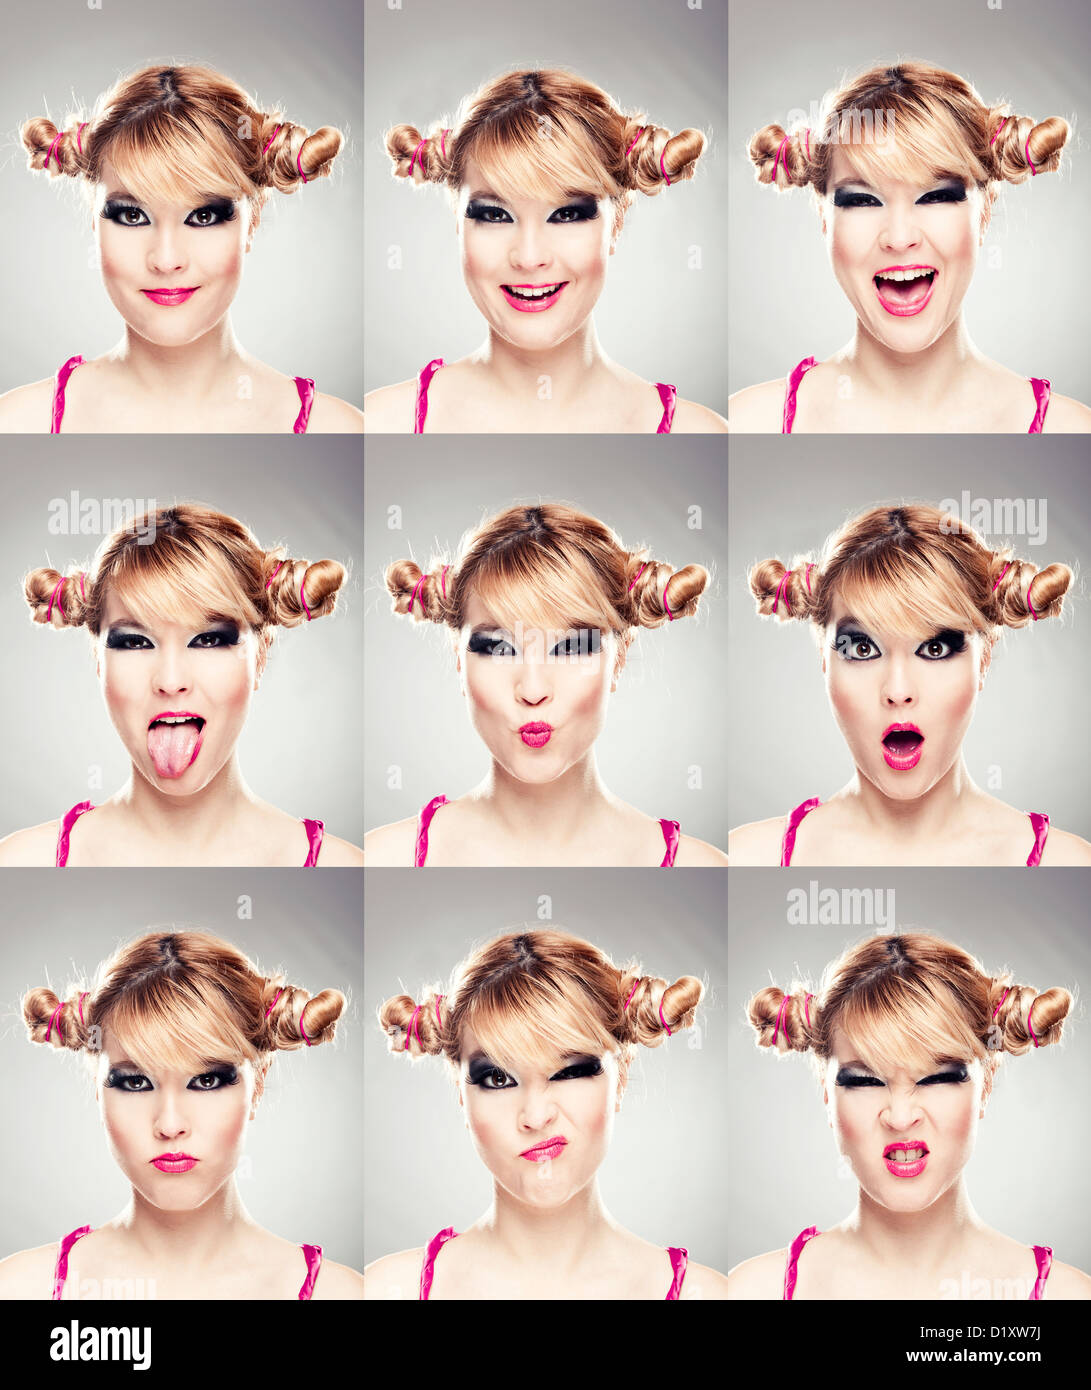 Multiple close-up portraits of the same woman expressing different emotions and expressions Stock Photo